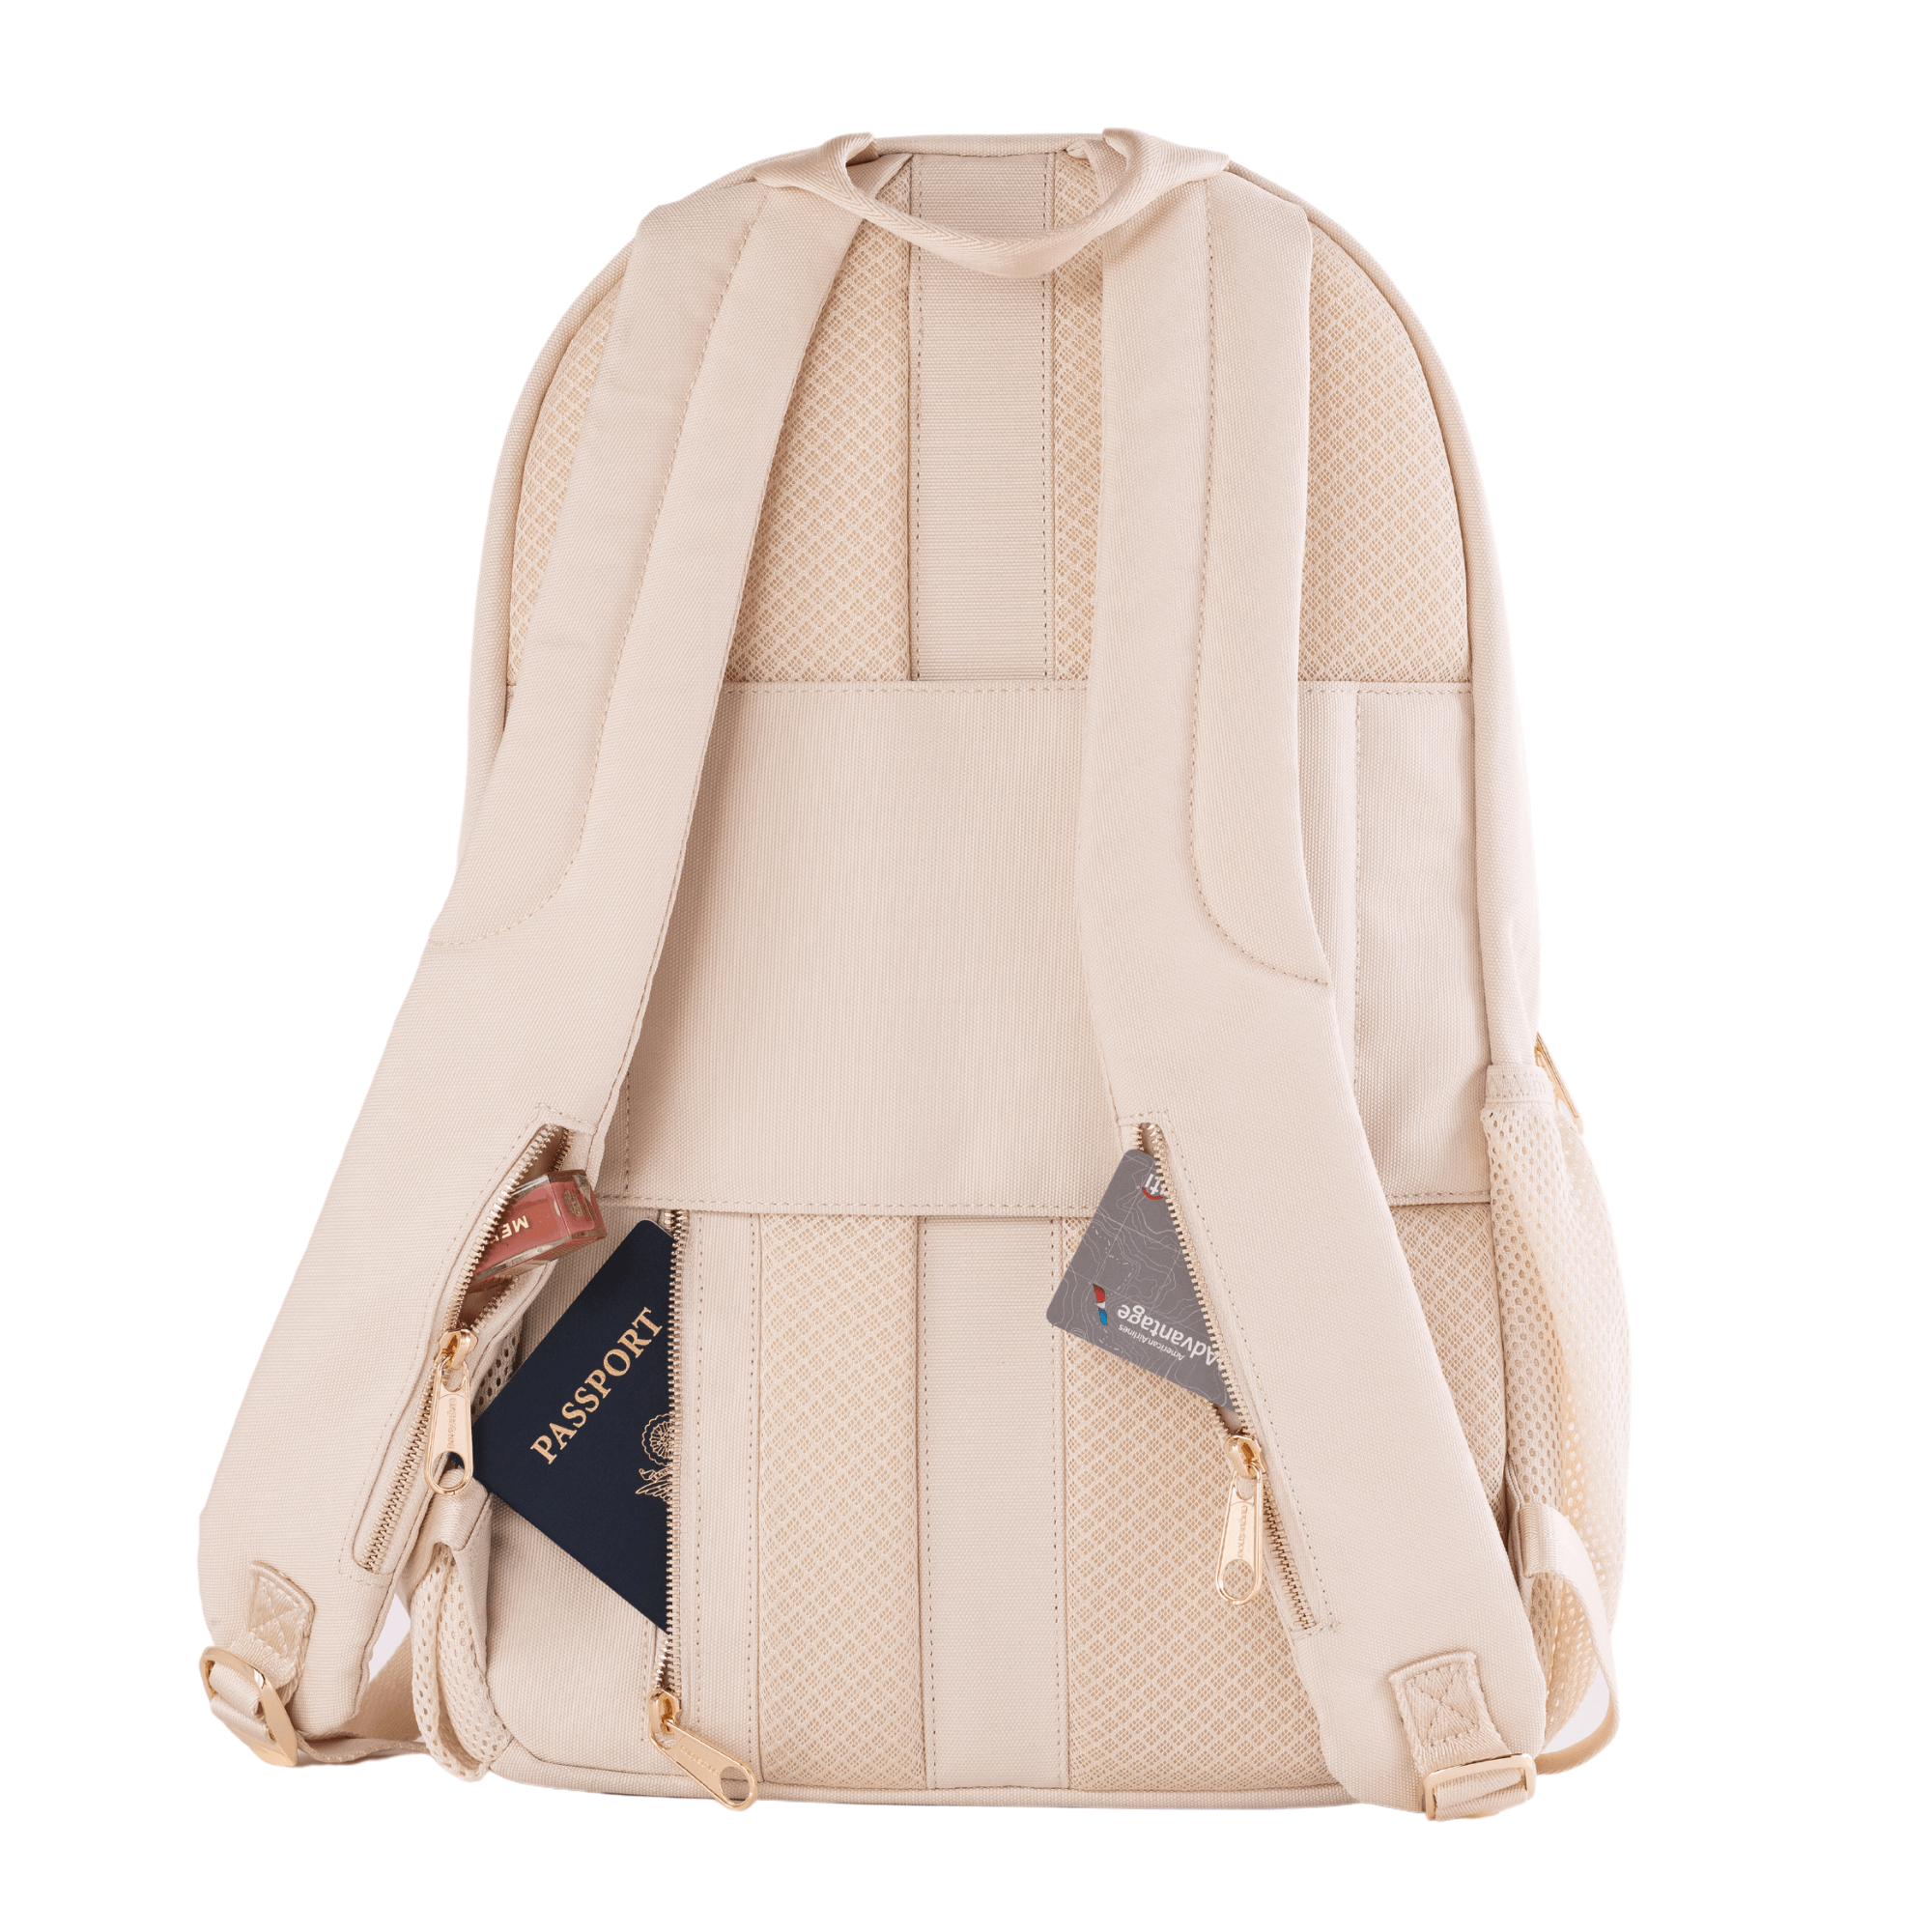 August Noa travel backpack in cream. Back view.